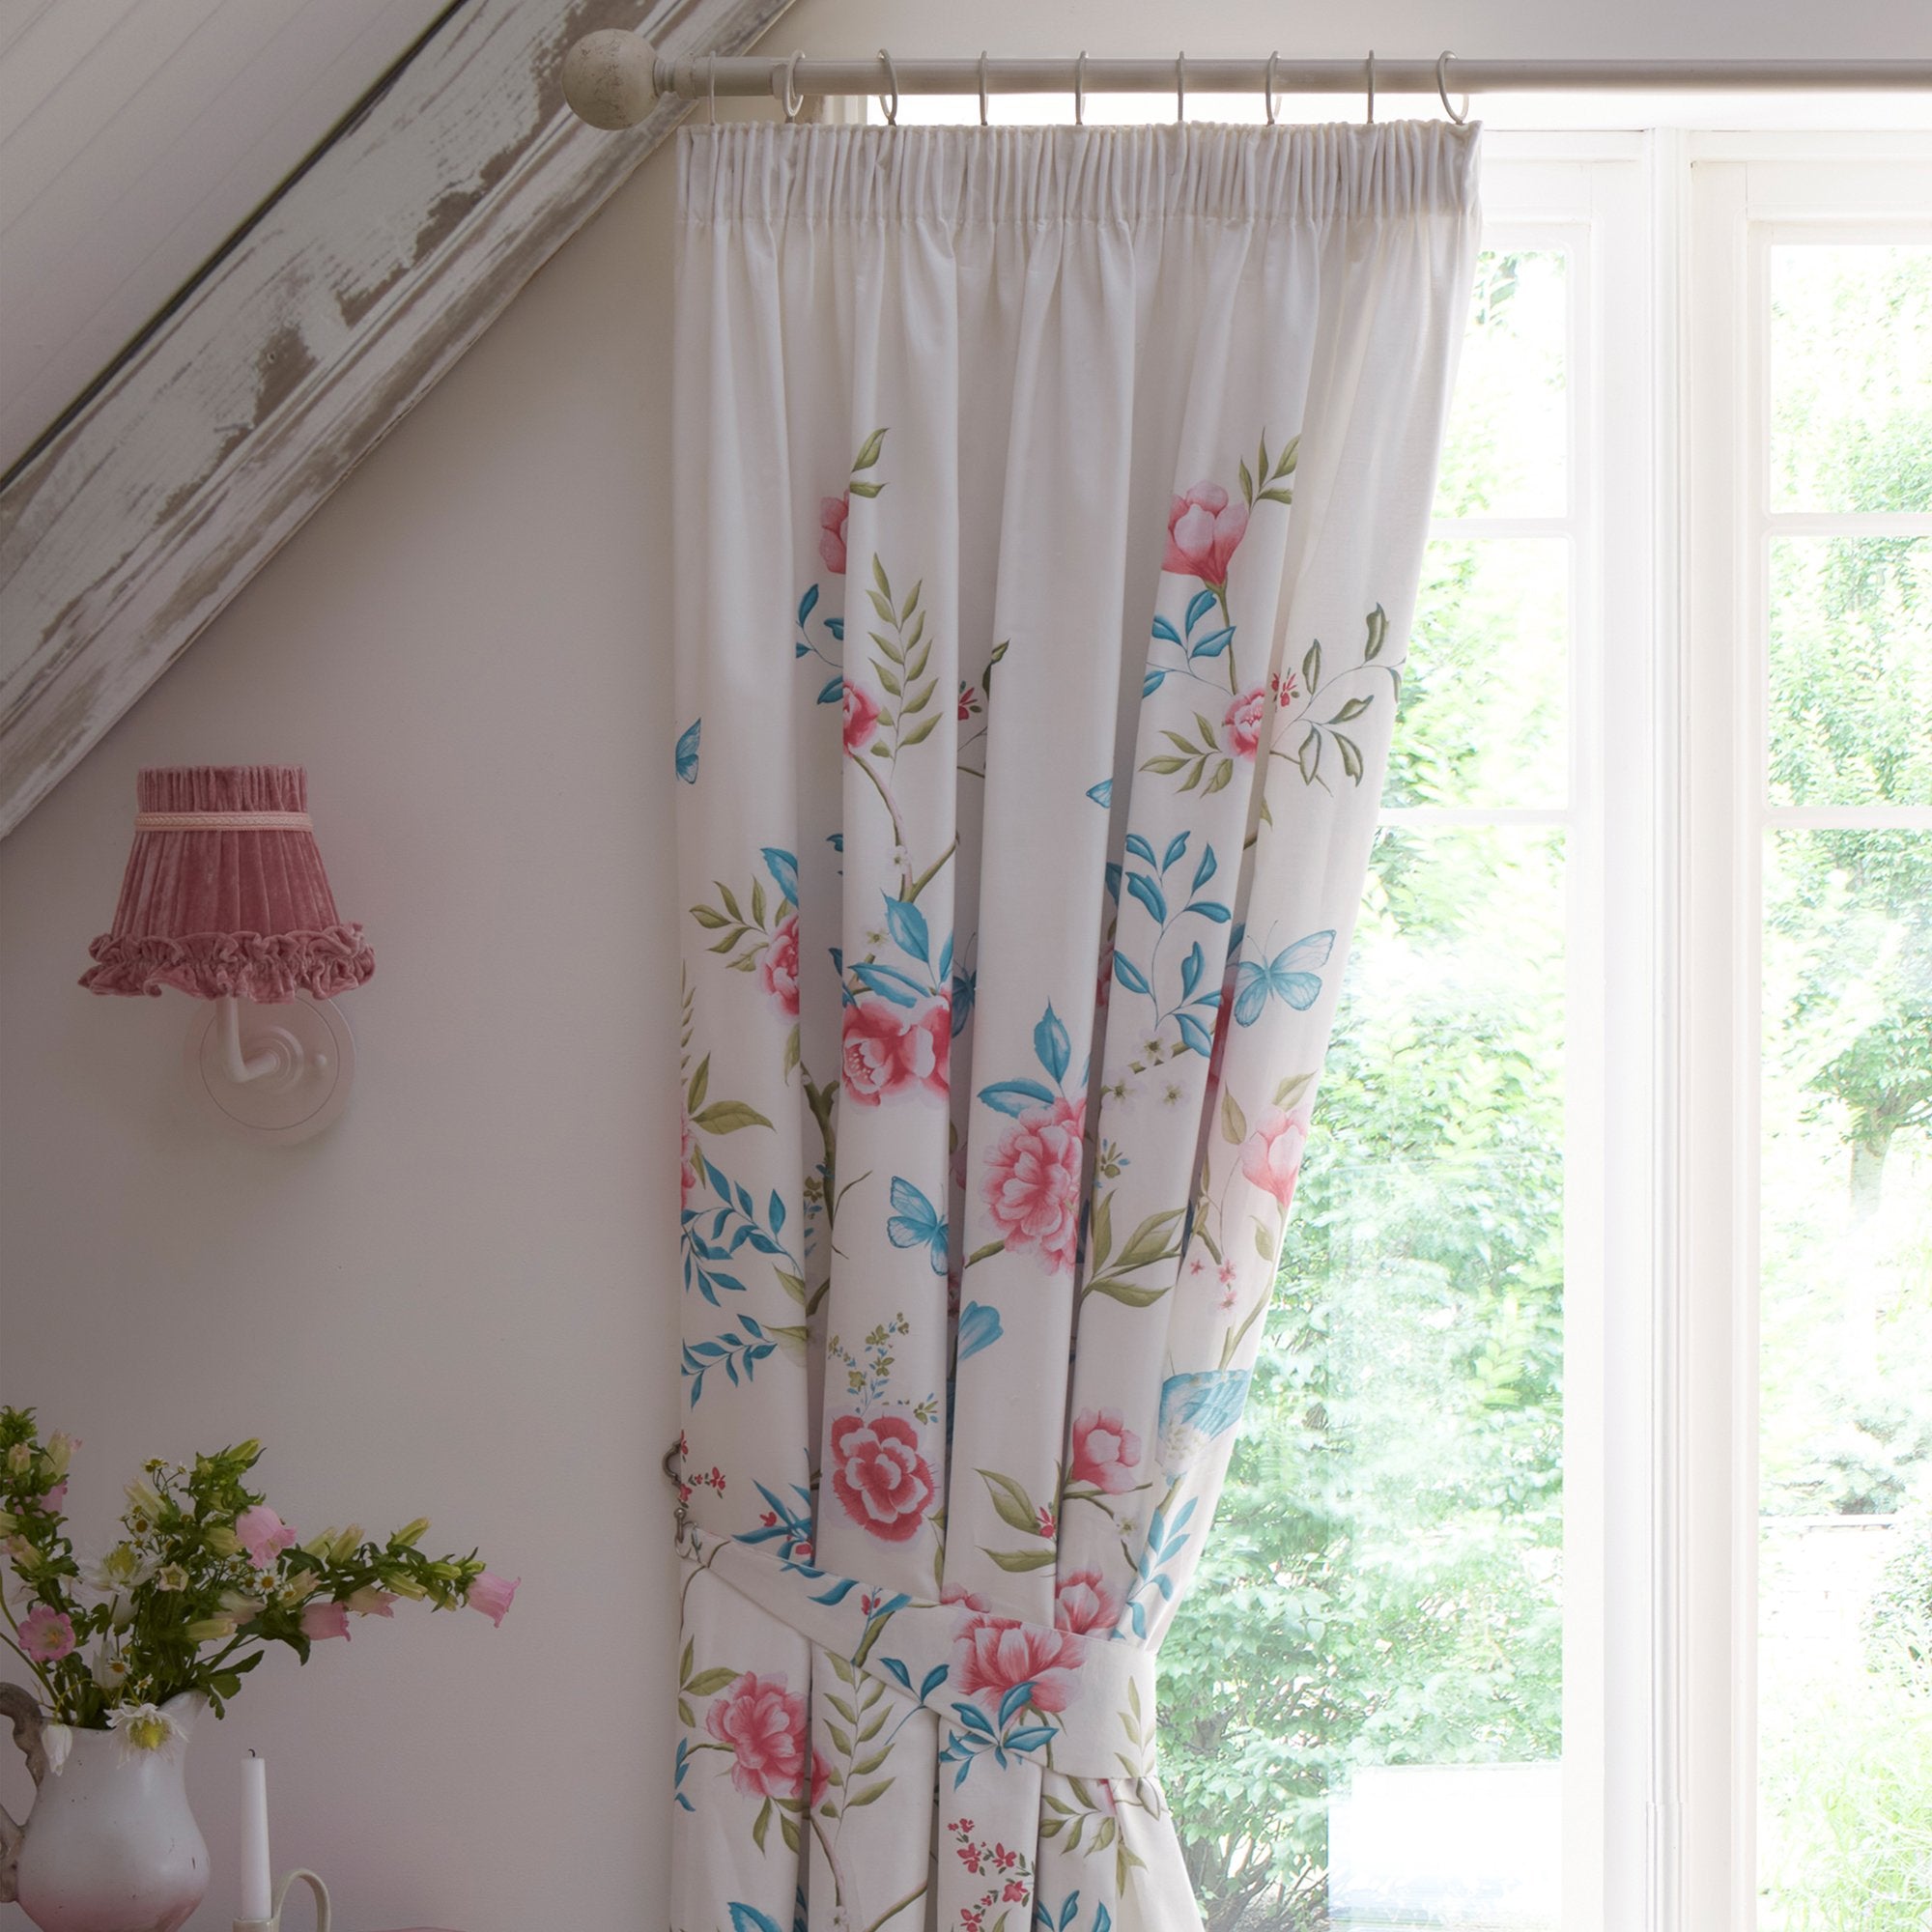 Pair of Pencil Pleat Curtains With Tie-Backs Amelle by Dreams & Drapes Design in Blue